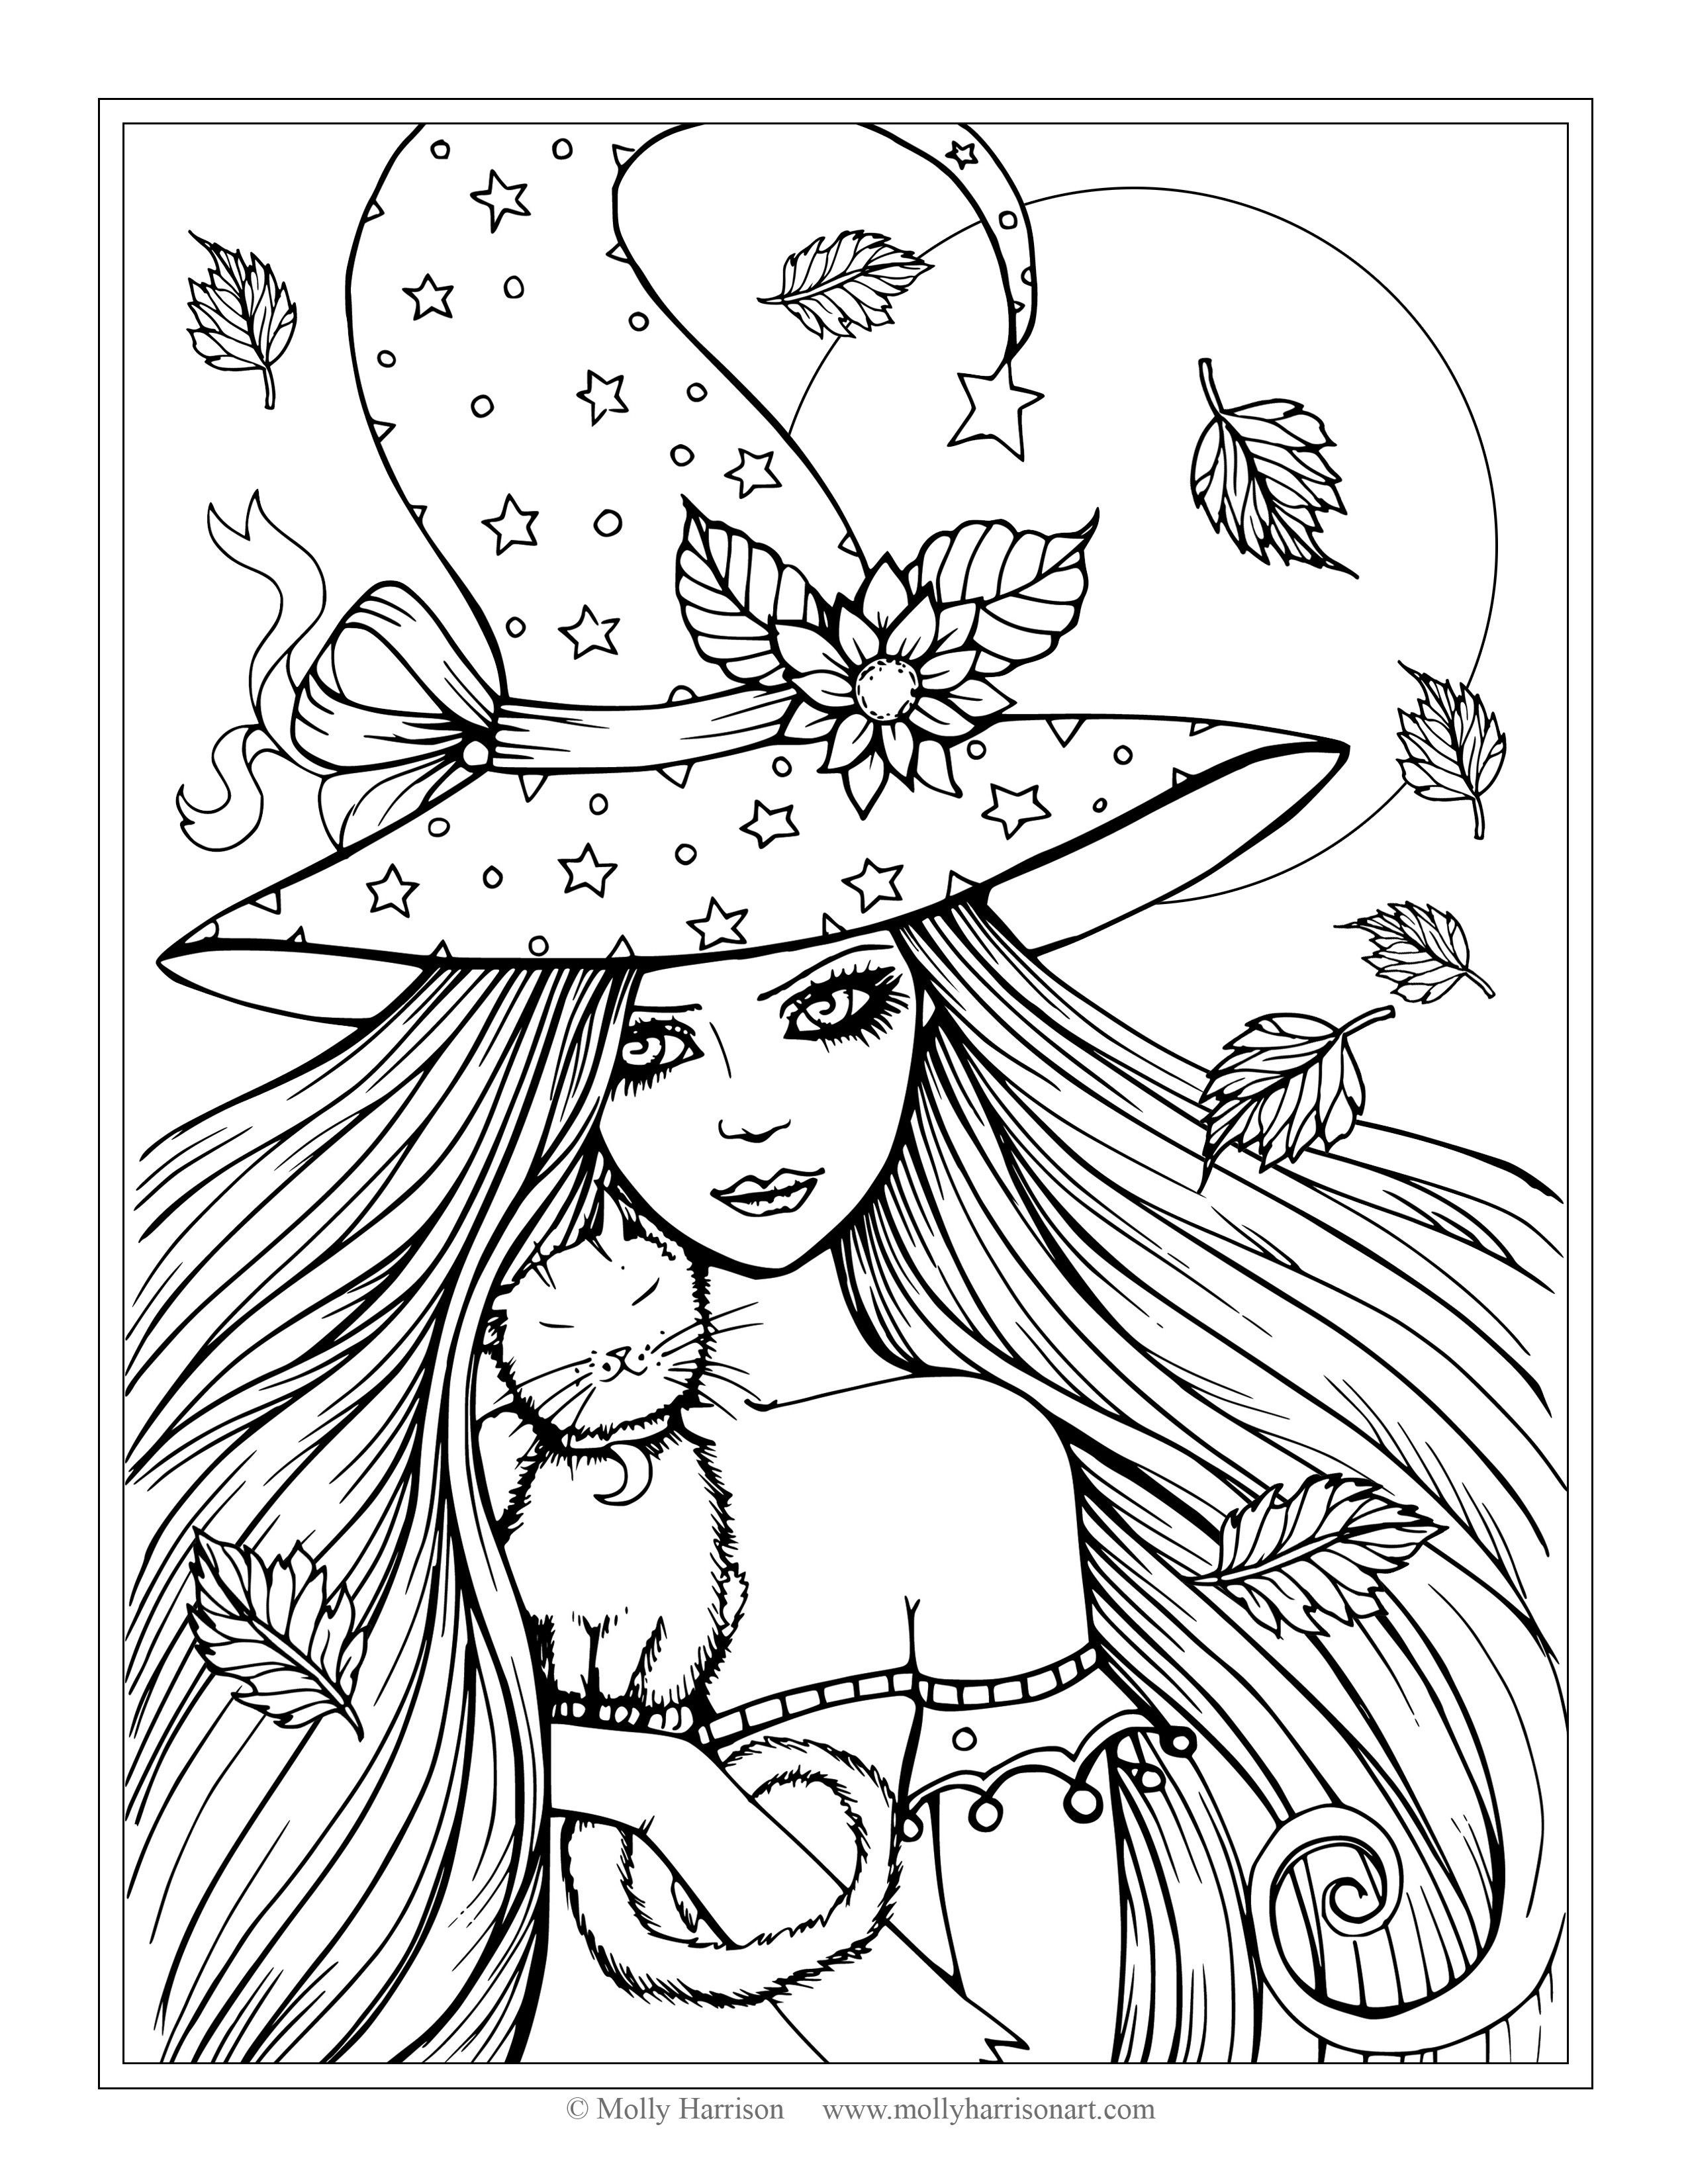 winged cat coloring pages new free witch and cat coloring page halloween coloring pages by molly of winged cat coloring pages